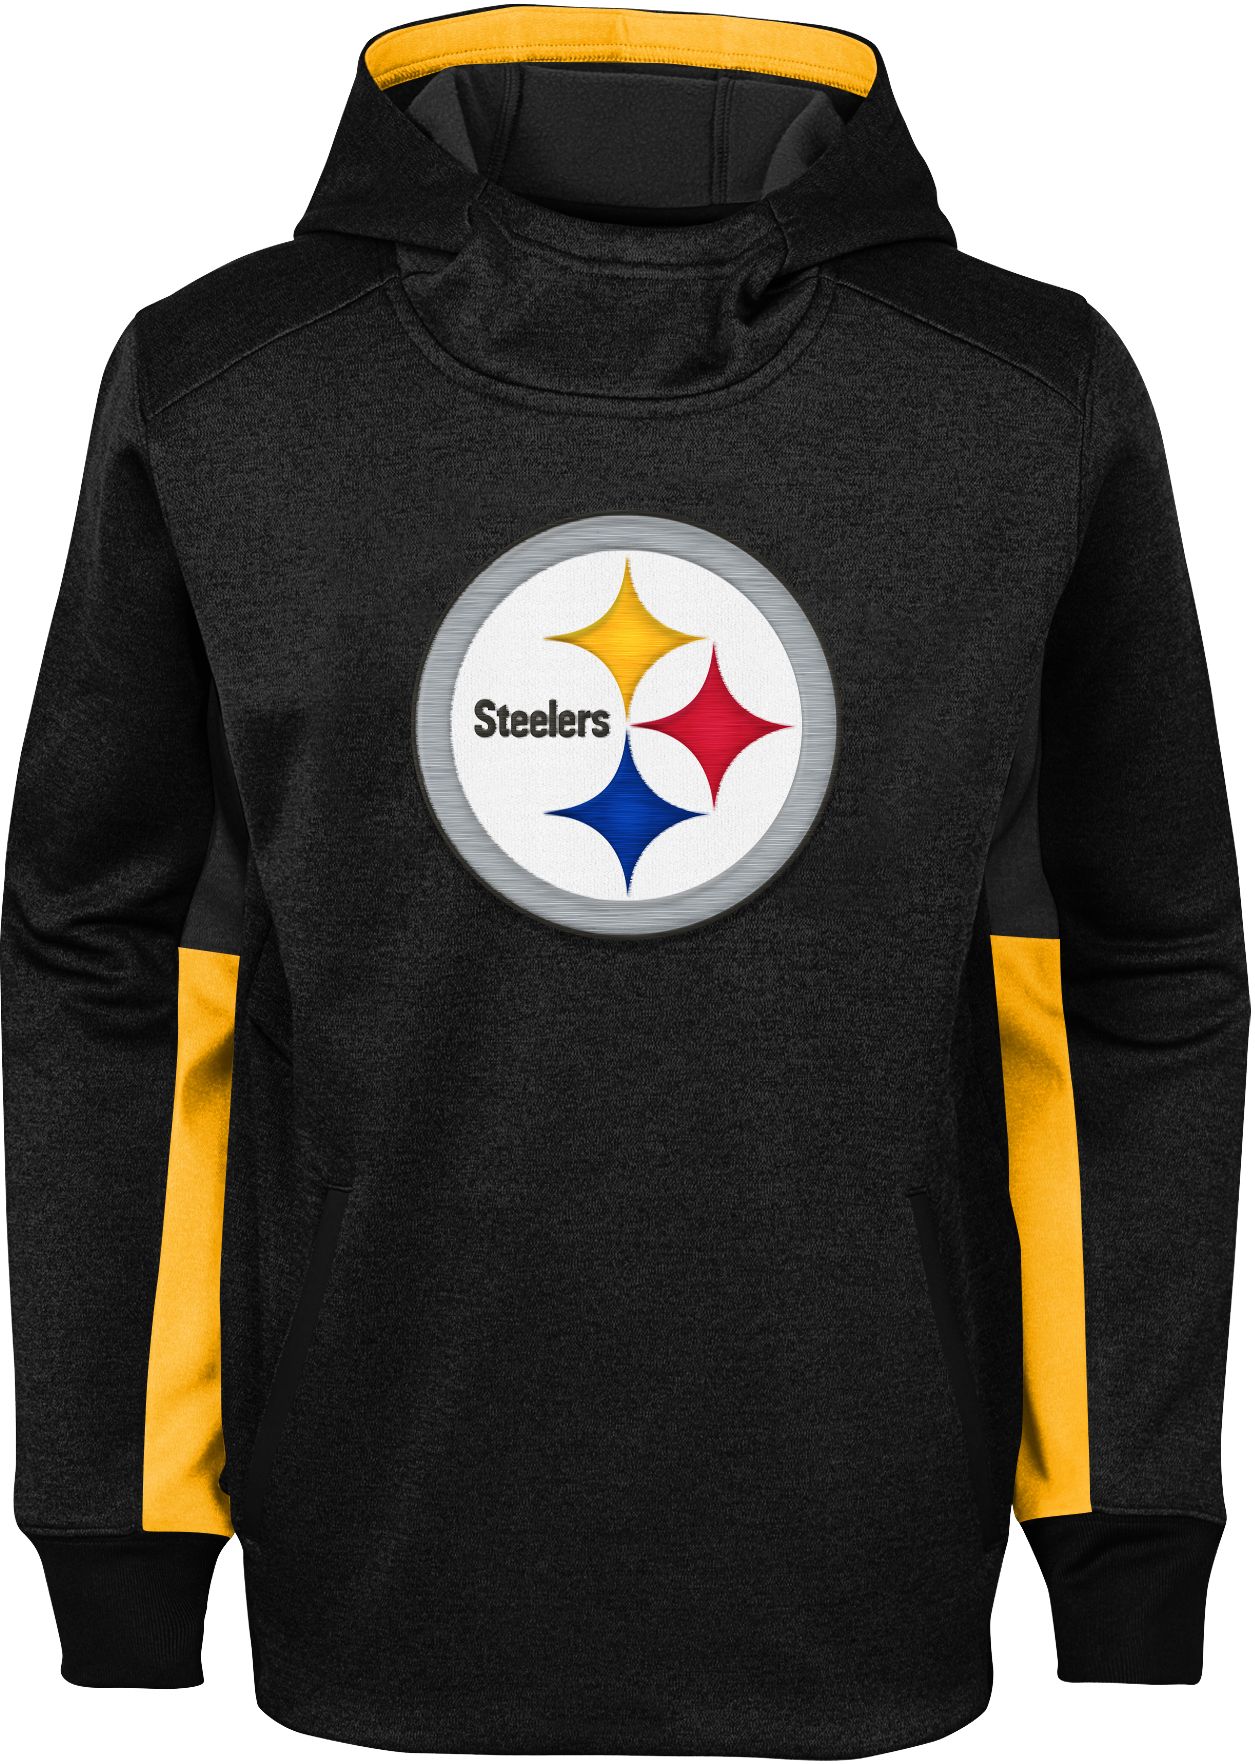 pittsburgh steelers youth apparel